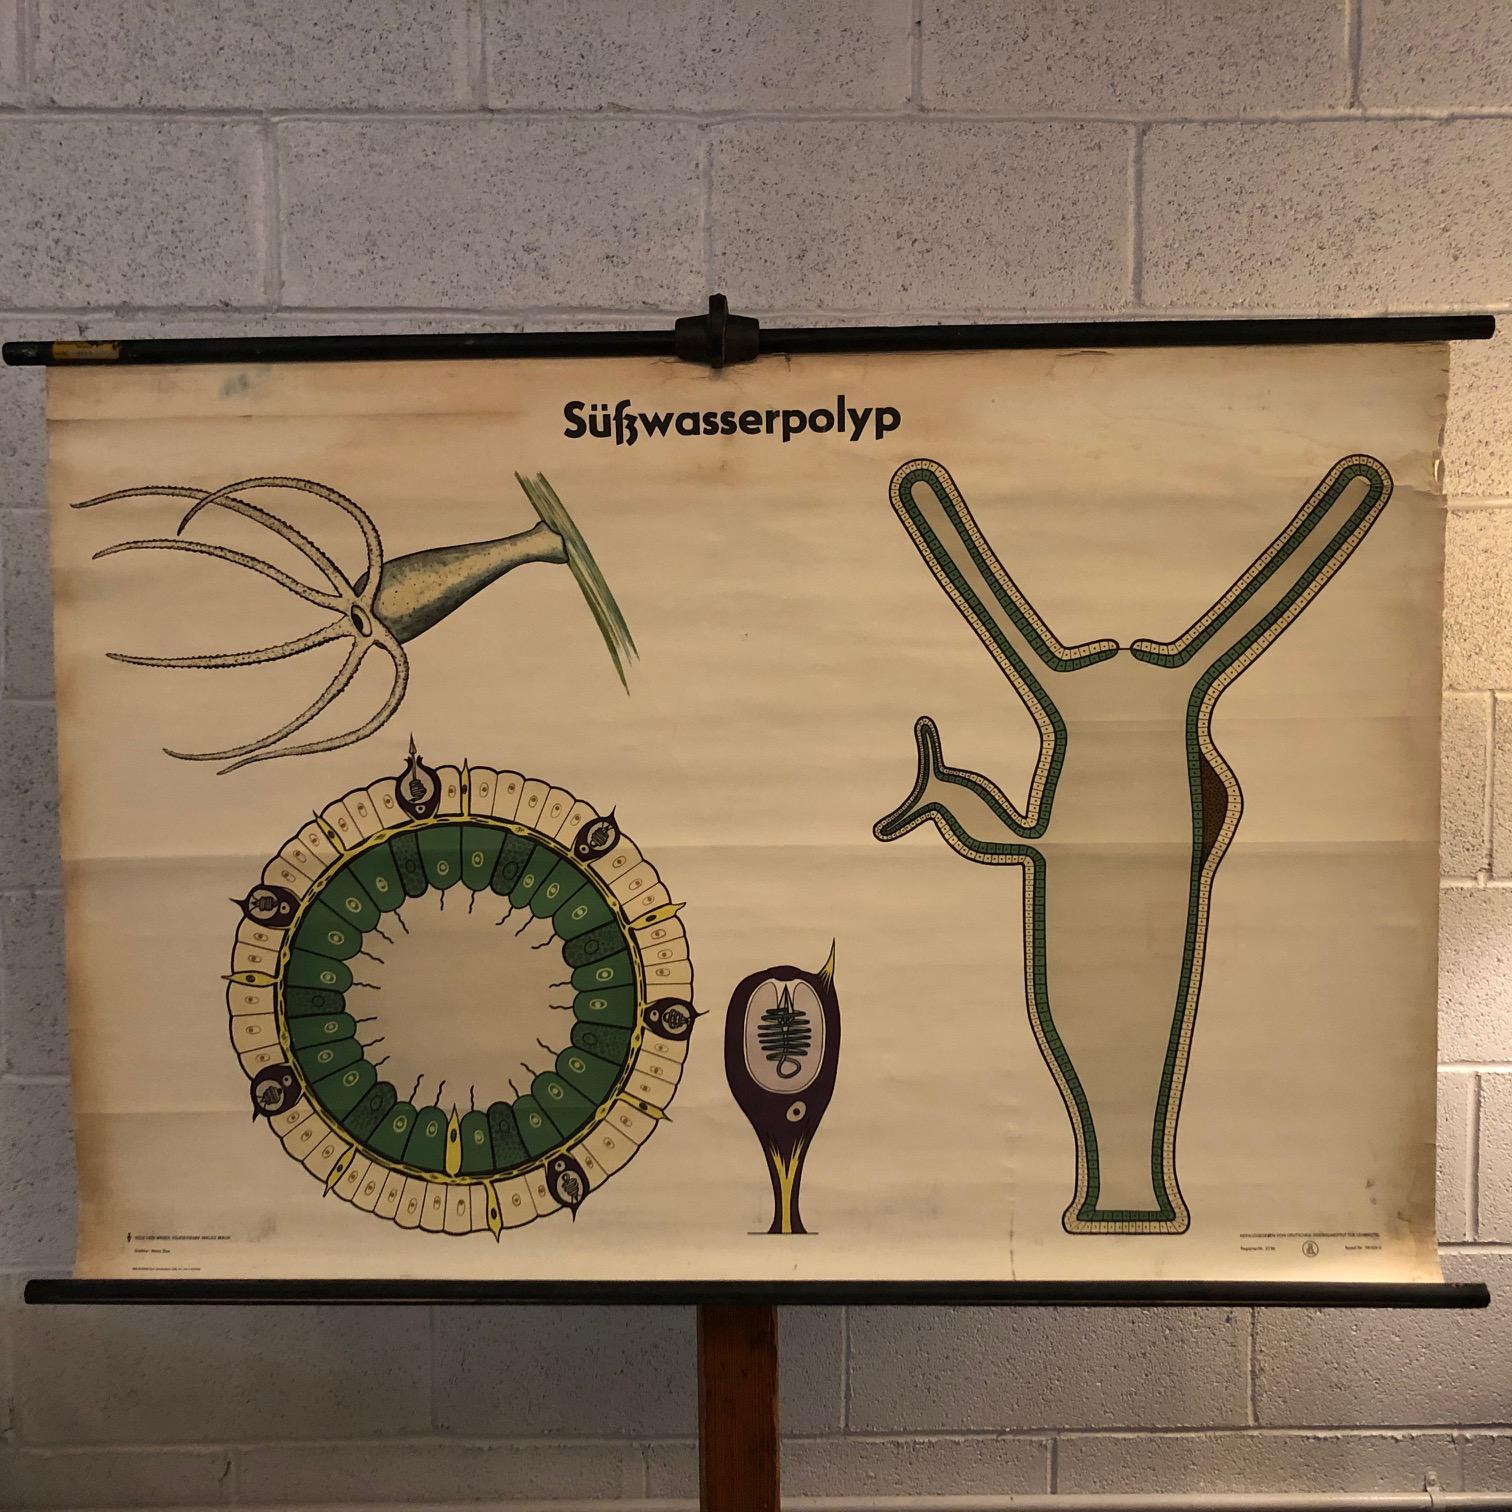 German, educational, zoological, roll-up chart depicting the süßwasserpolyp hydra or freshwater polyp is printed on canvas backed paper with .75 inch diameter painted wooden dowels with ring and cotton suspension string for hanging.